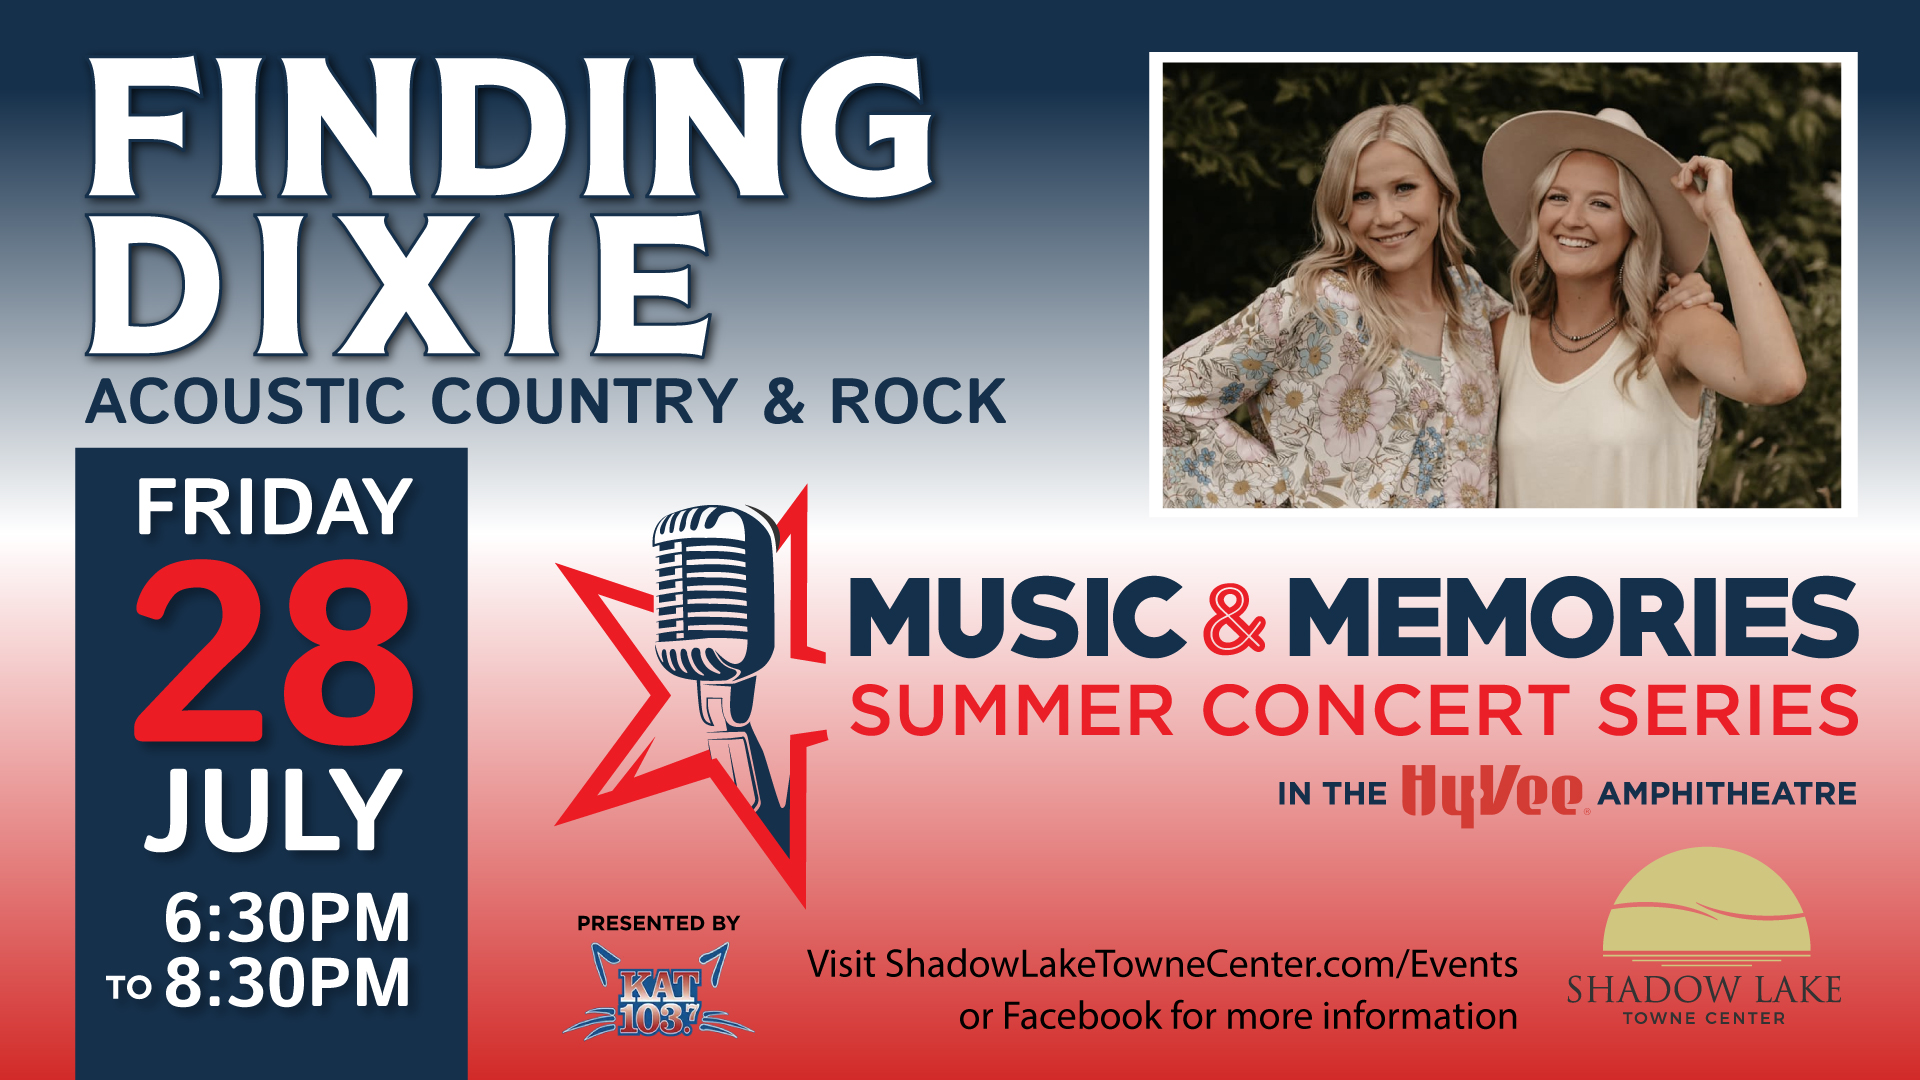 Shadow Lake Towne Center Music and Memories Concert Finding Dixie